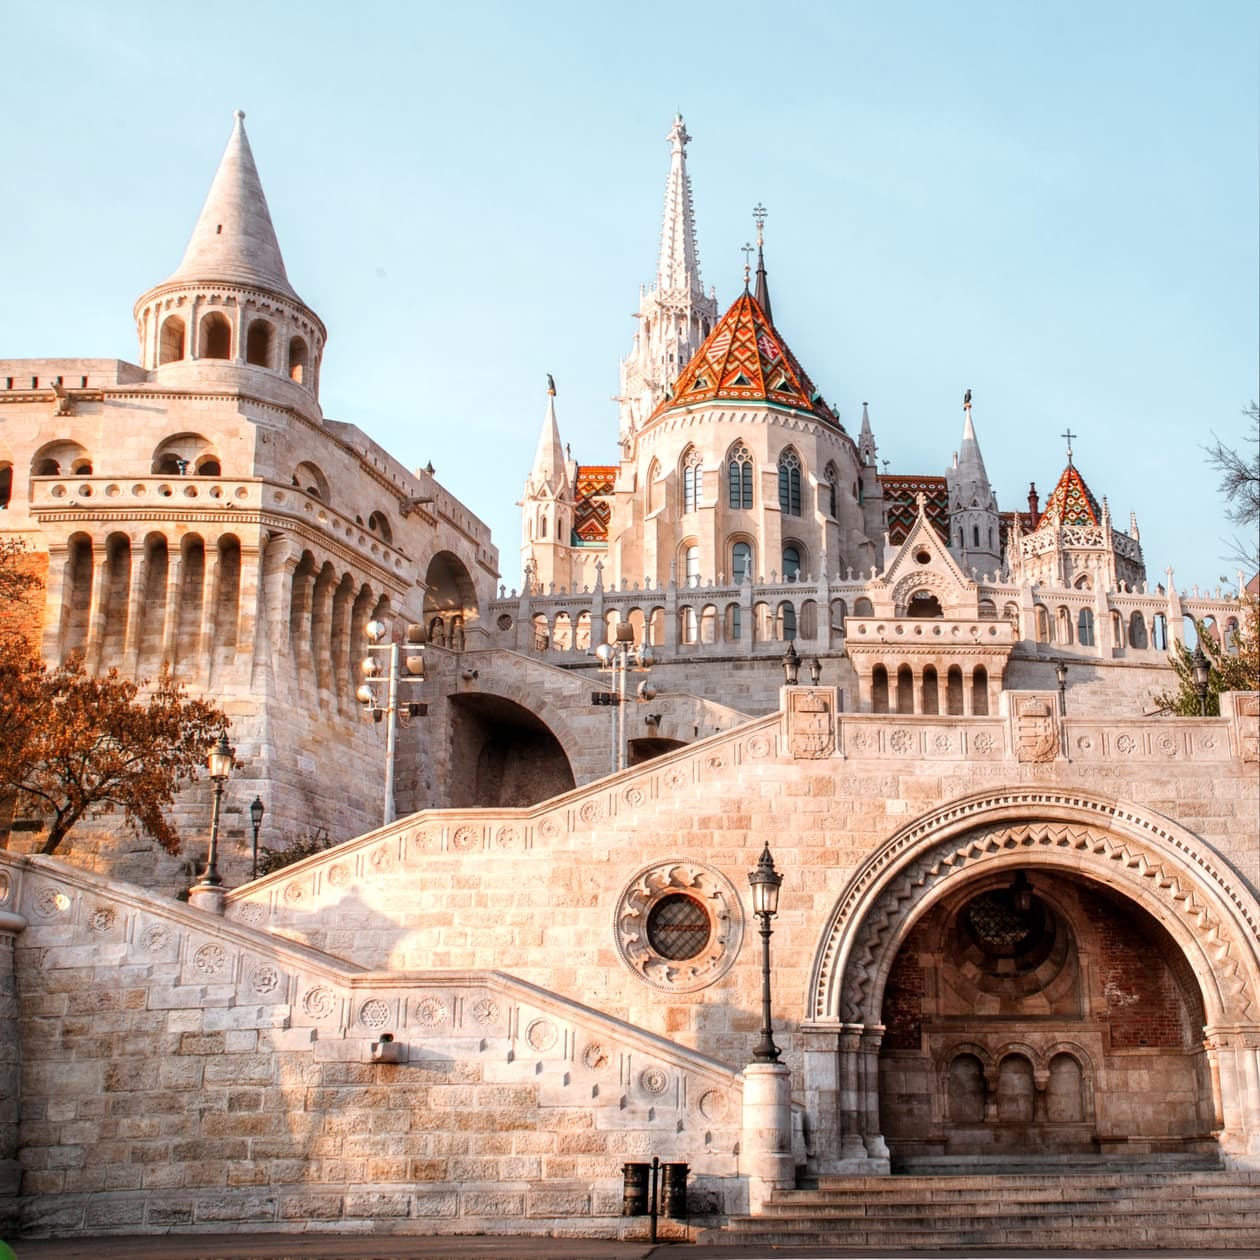 The "Best Things" To See In Budapest: Explore Fisherman's Bastion